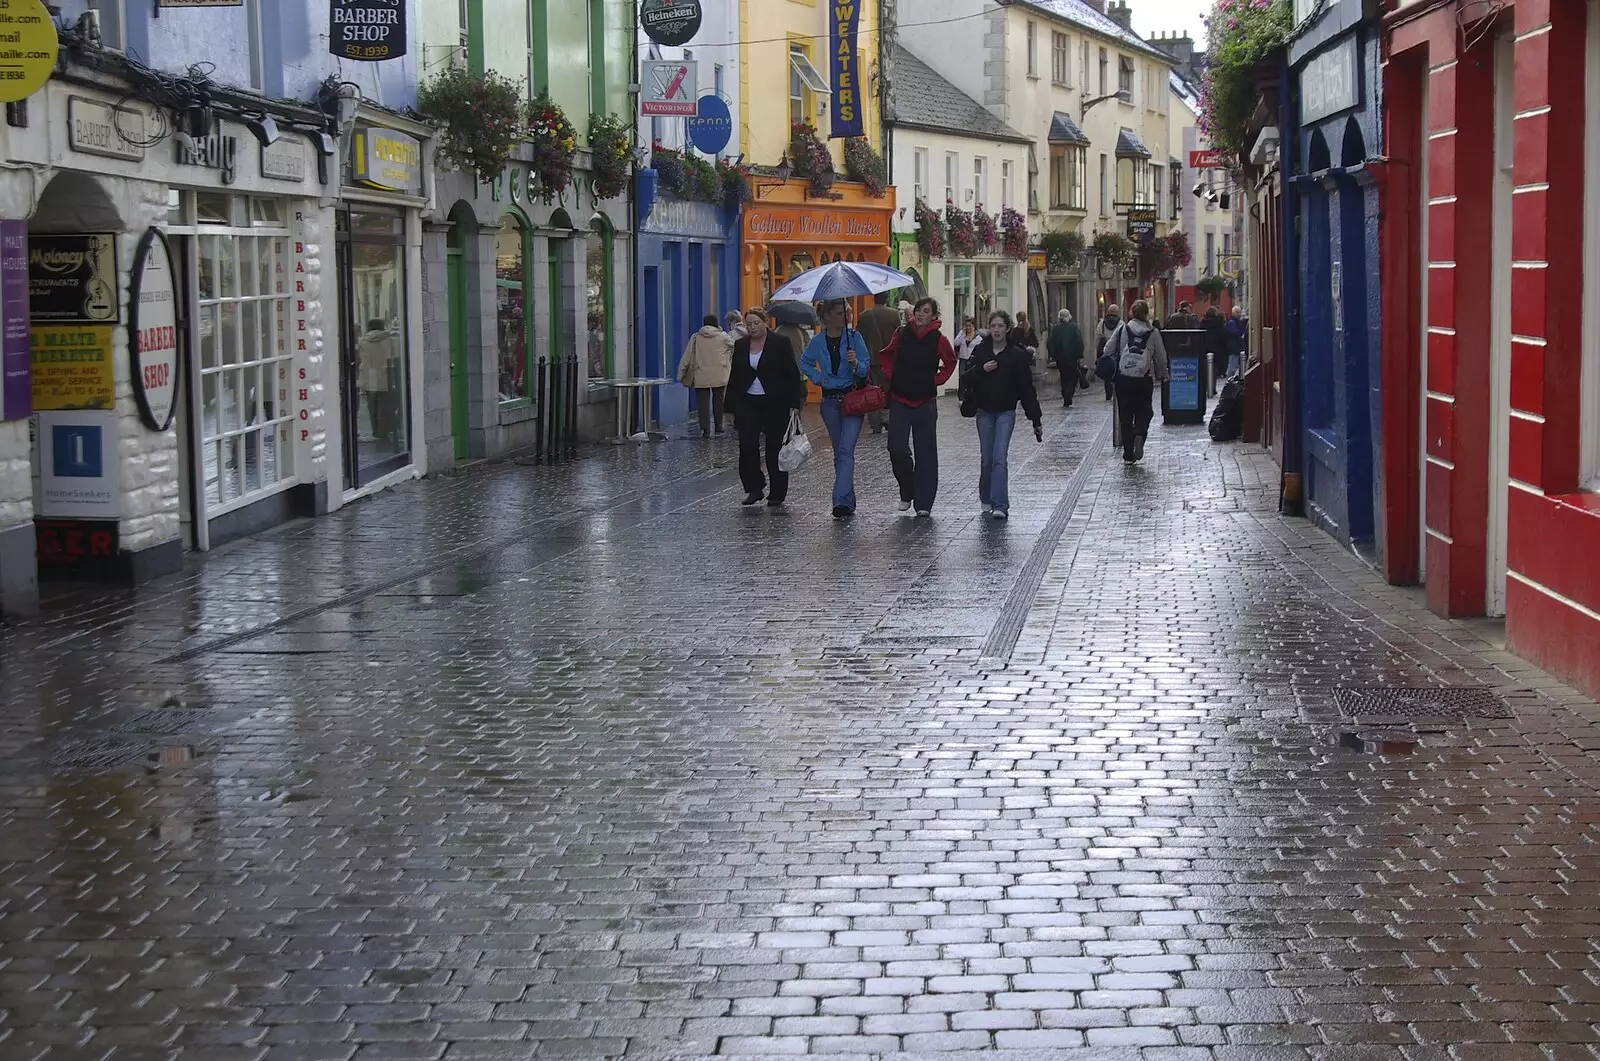 The damp cobbles of Galway, from Kilkee to Galway, Connacht, Ireland - 23rd September 2007